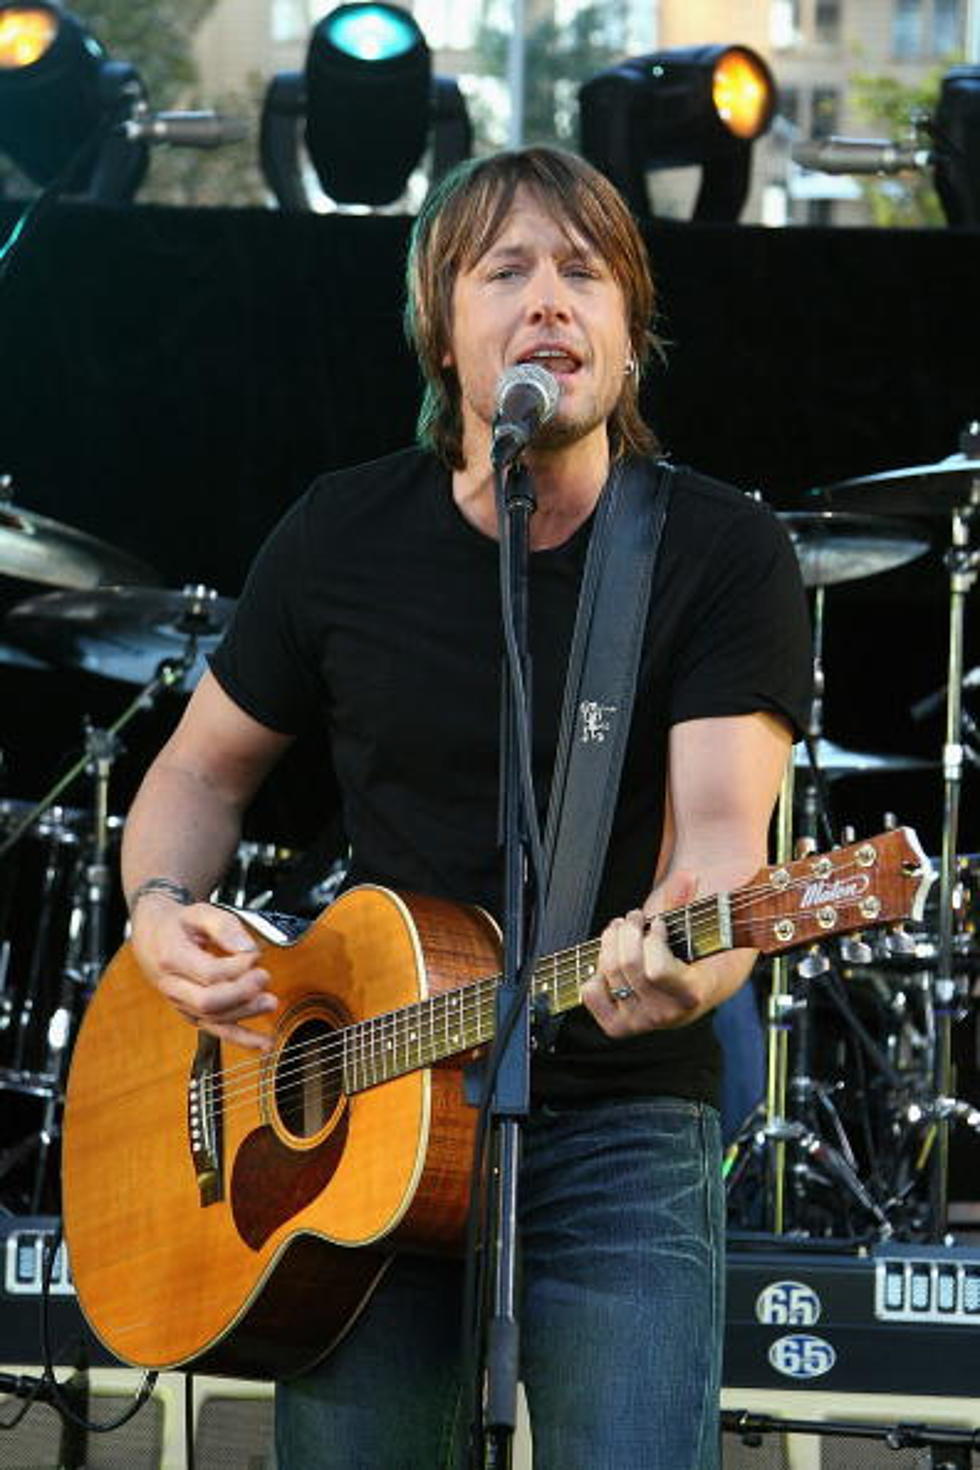 New Music From Keith Urban Tomorrow Night At CMT Awards-Listen For Yourself